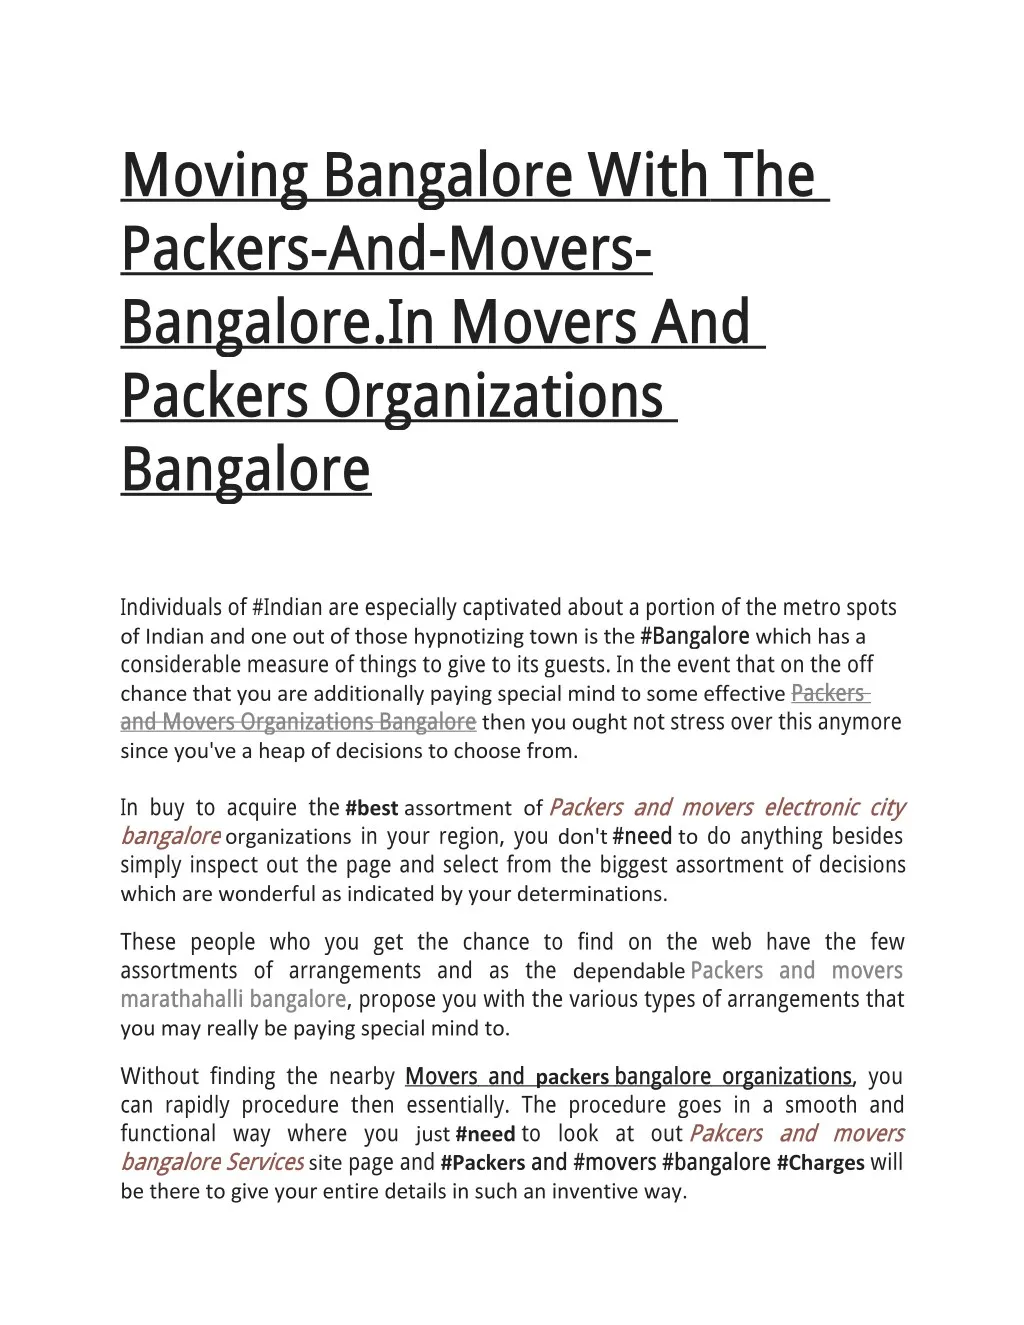 moving bangalore with the packers and movers